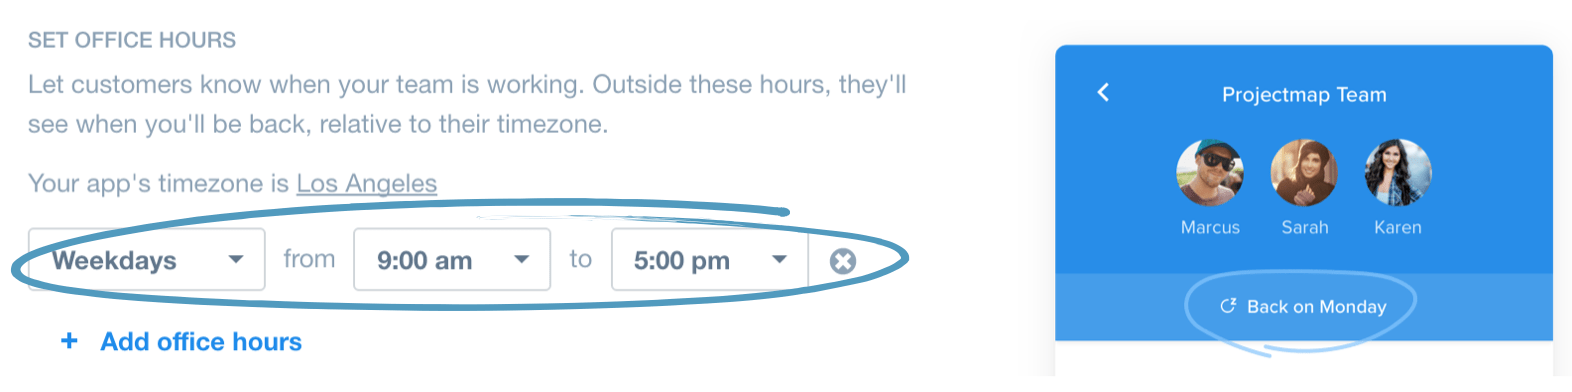 Setting live chat office hours in Intercom